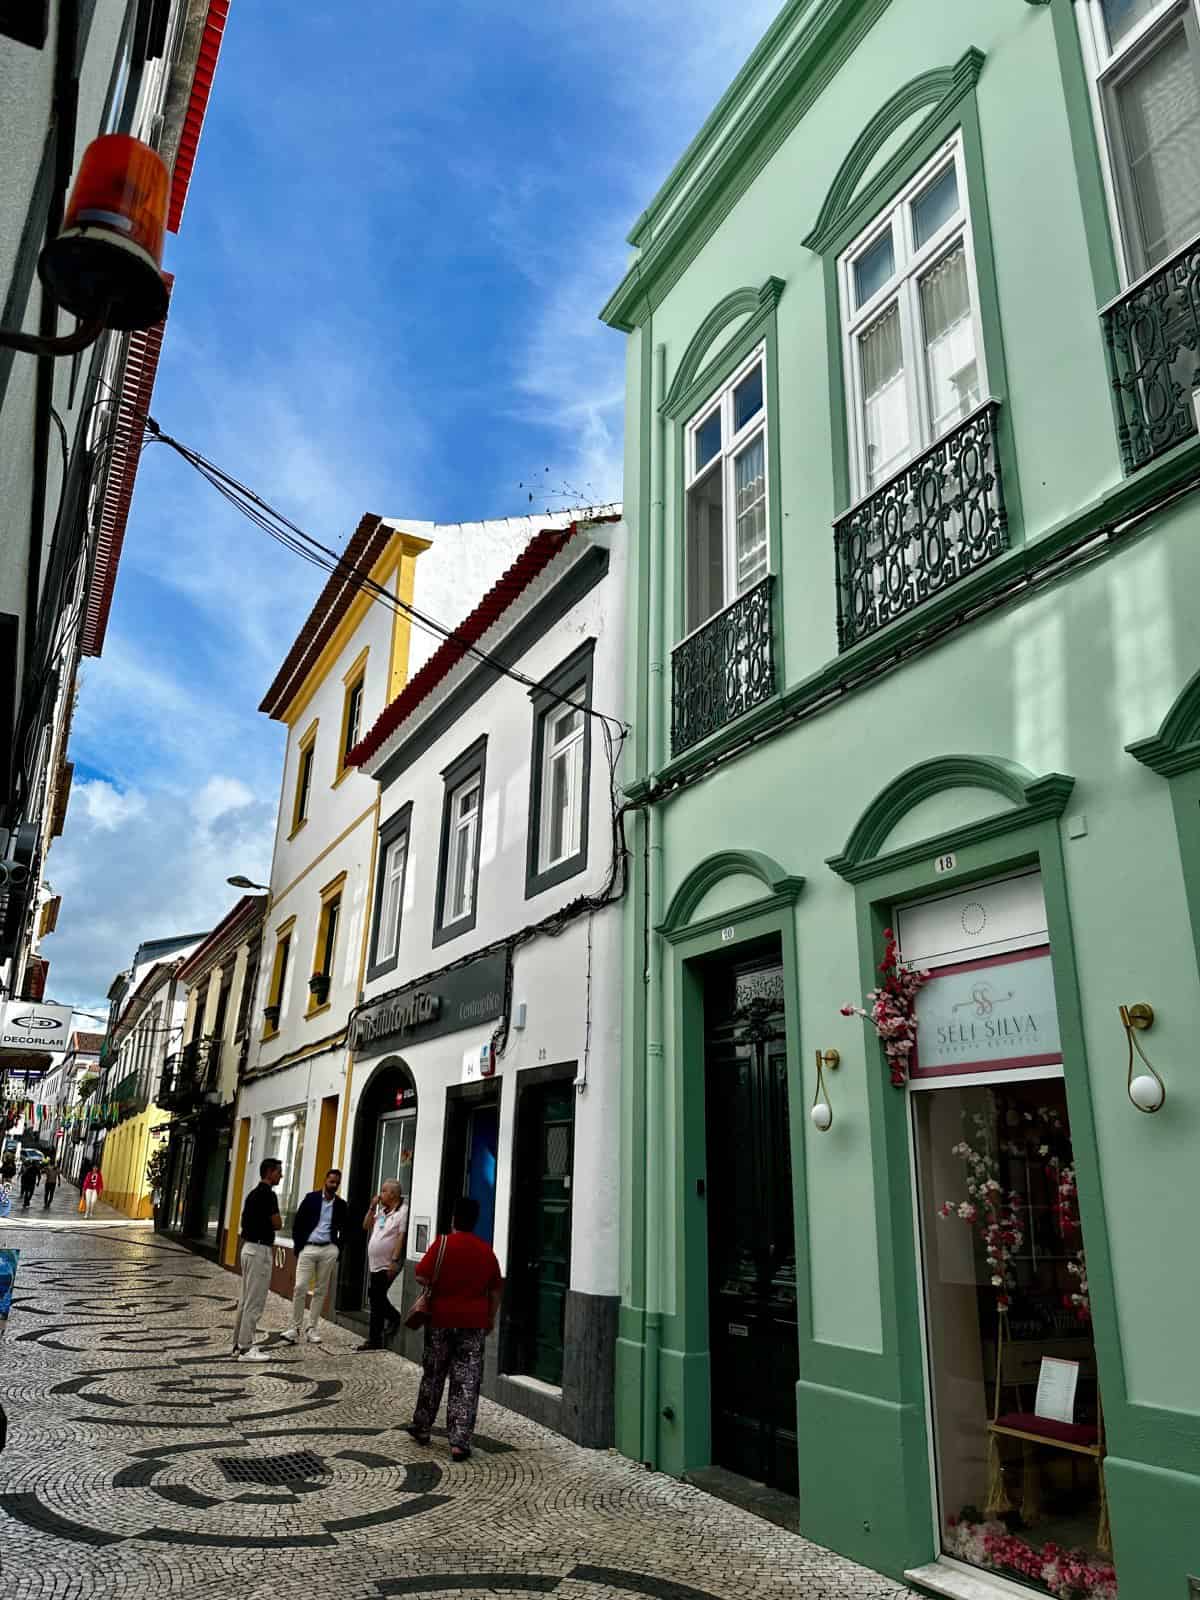 Things to Do in Ponta Delgada (Azores) - wander the narrow streets & enjoy the mosaic tiled pavings and colorful buildings